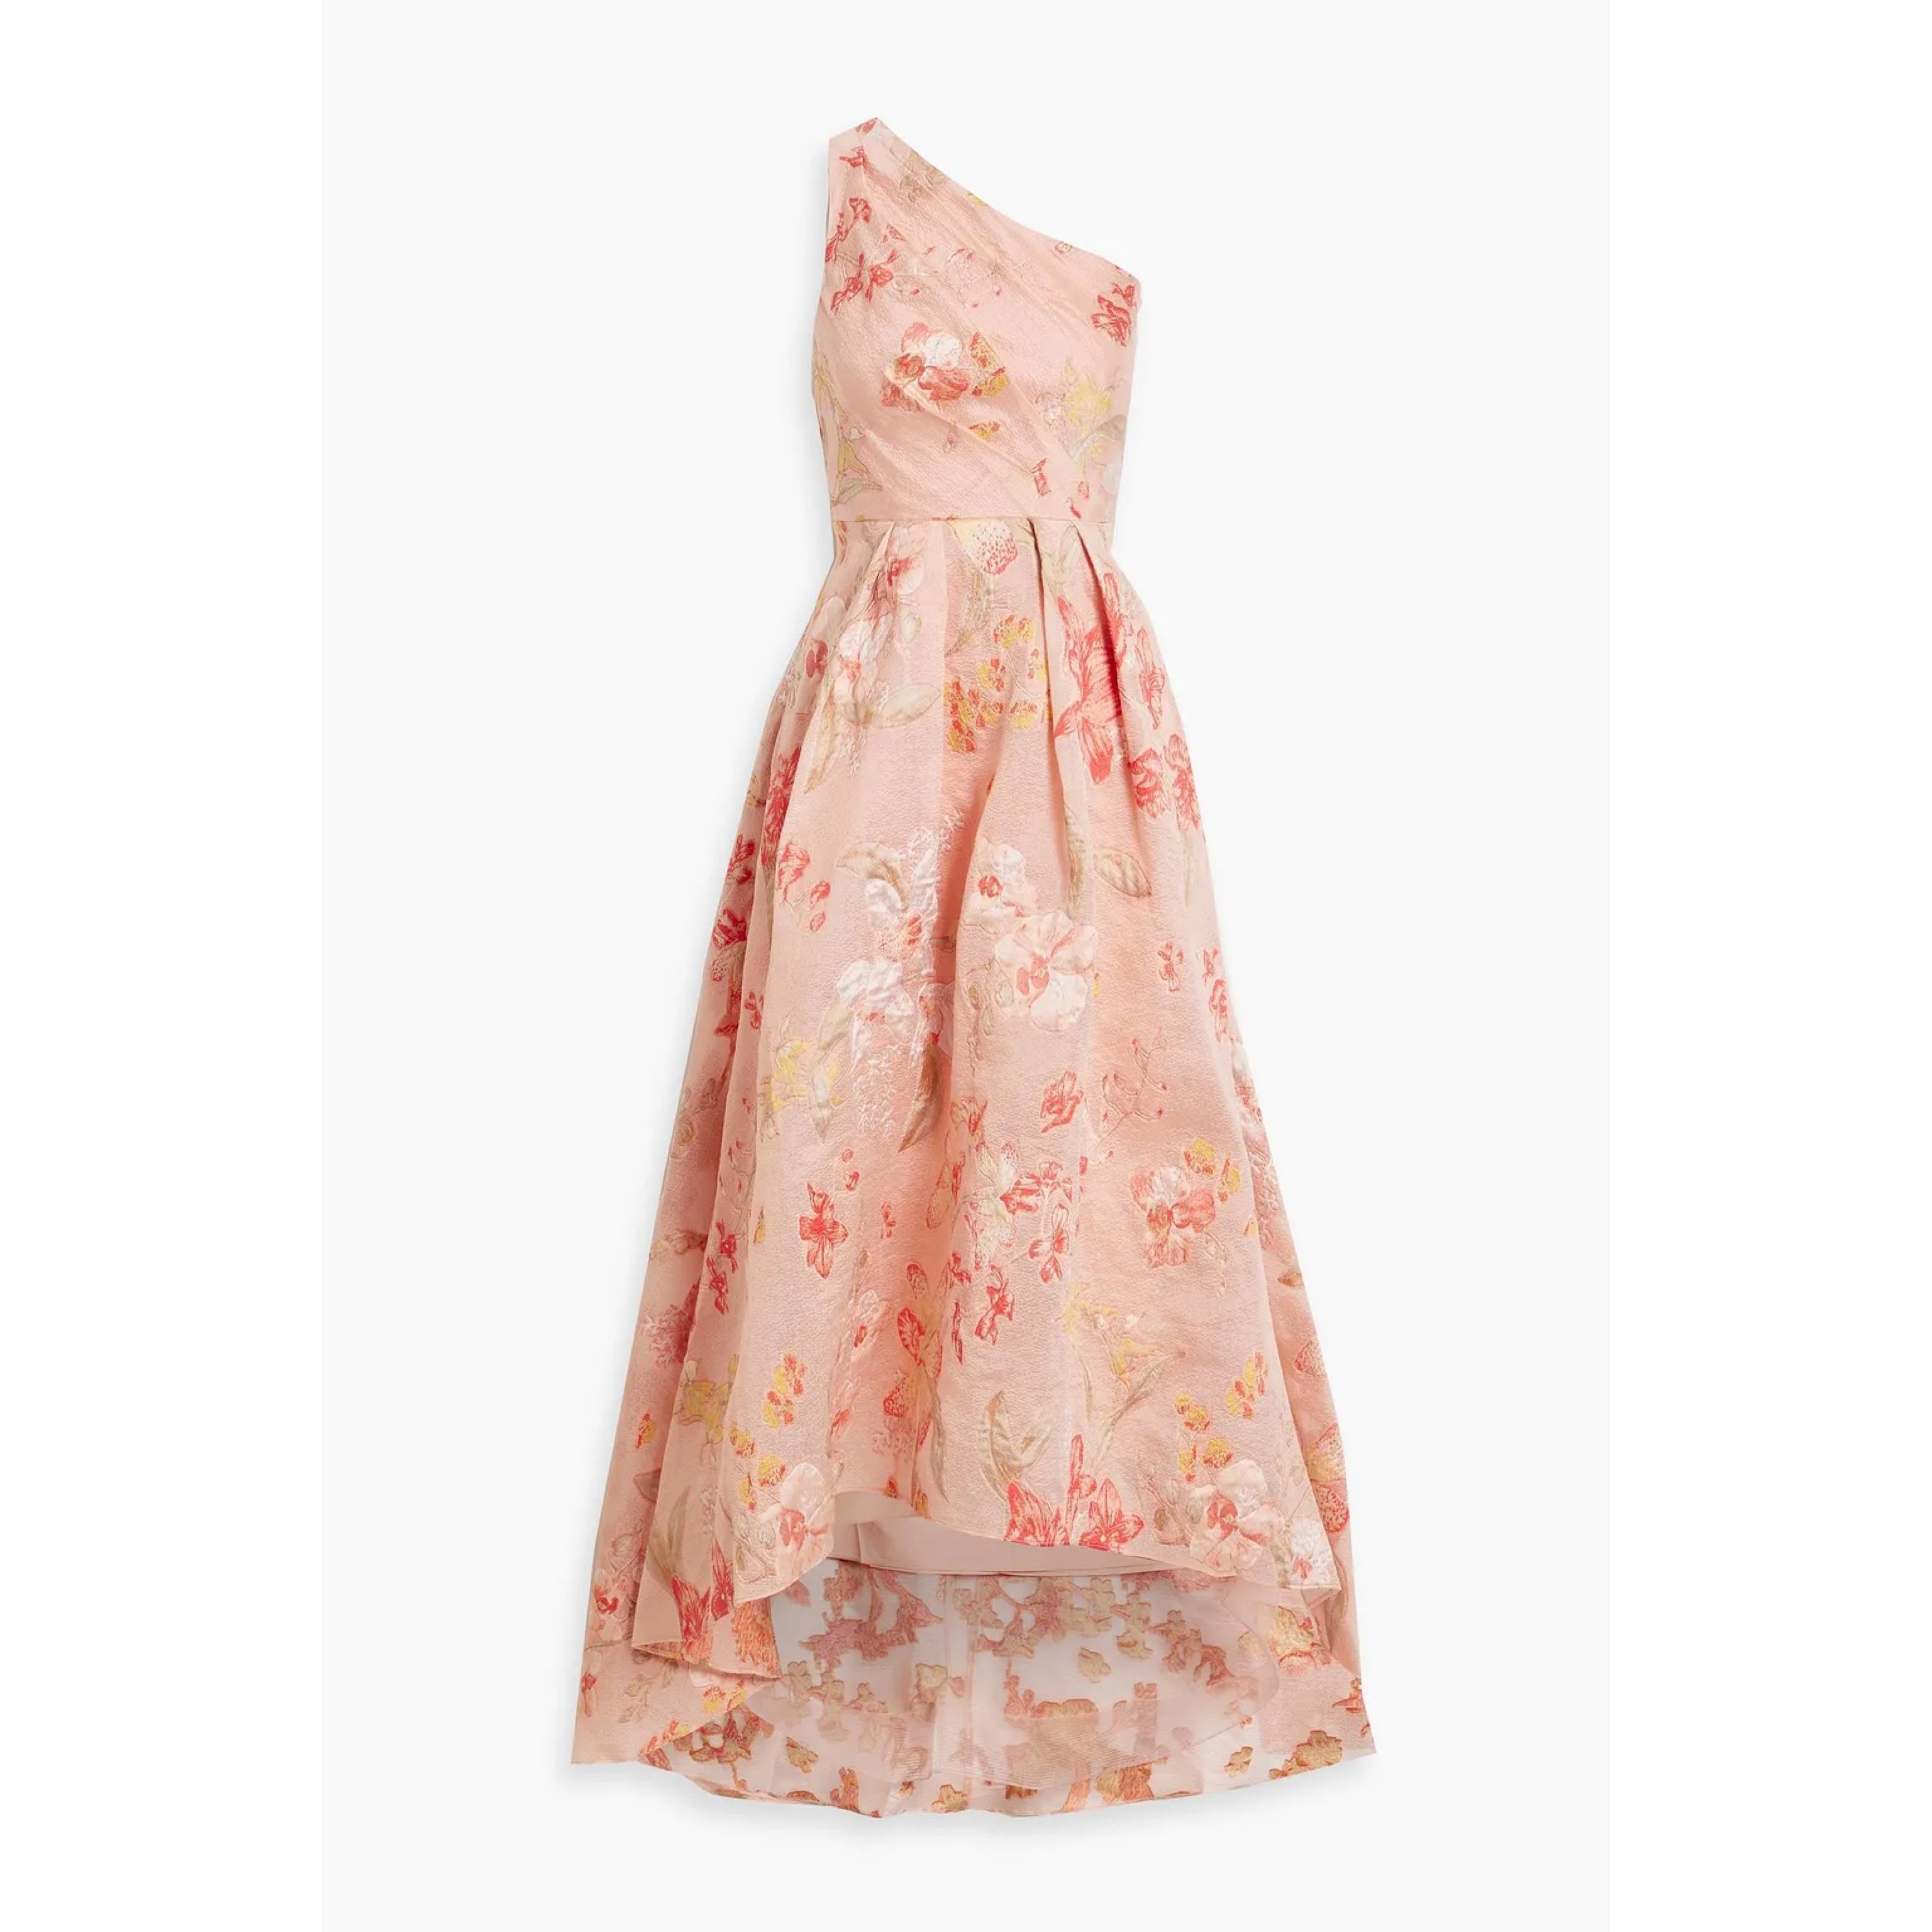 Marchesa Notte peach floral dress, size 6, NEW WITH TAGS!